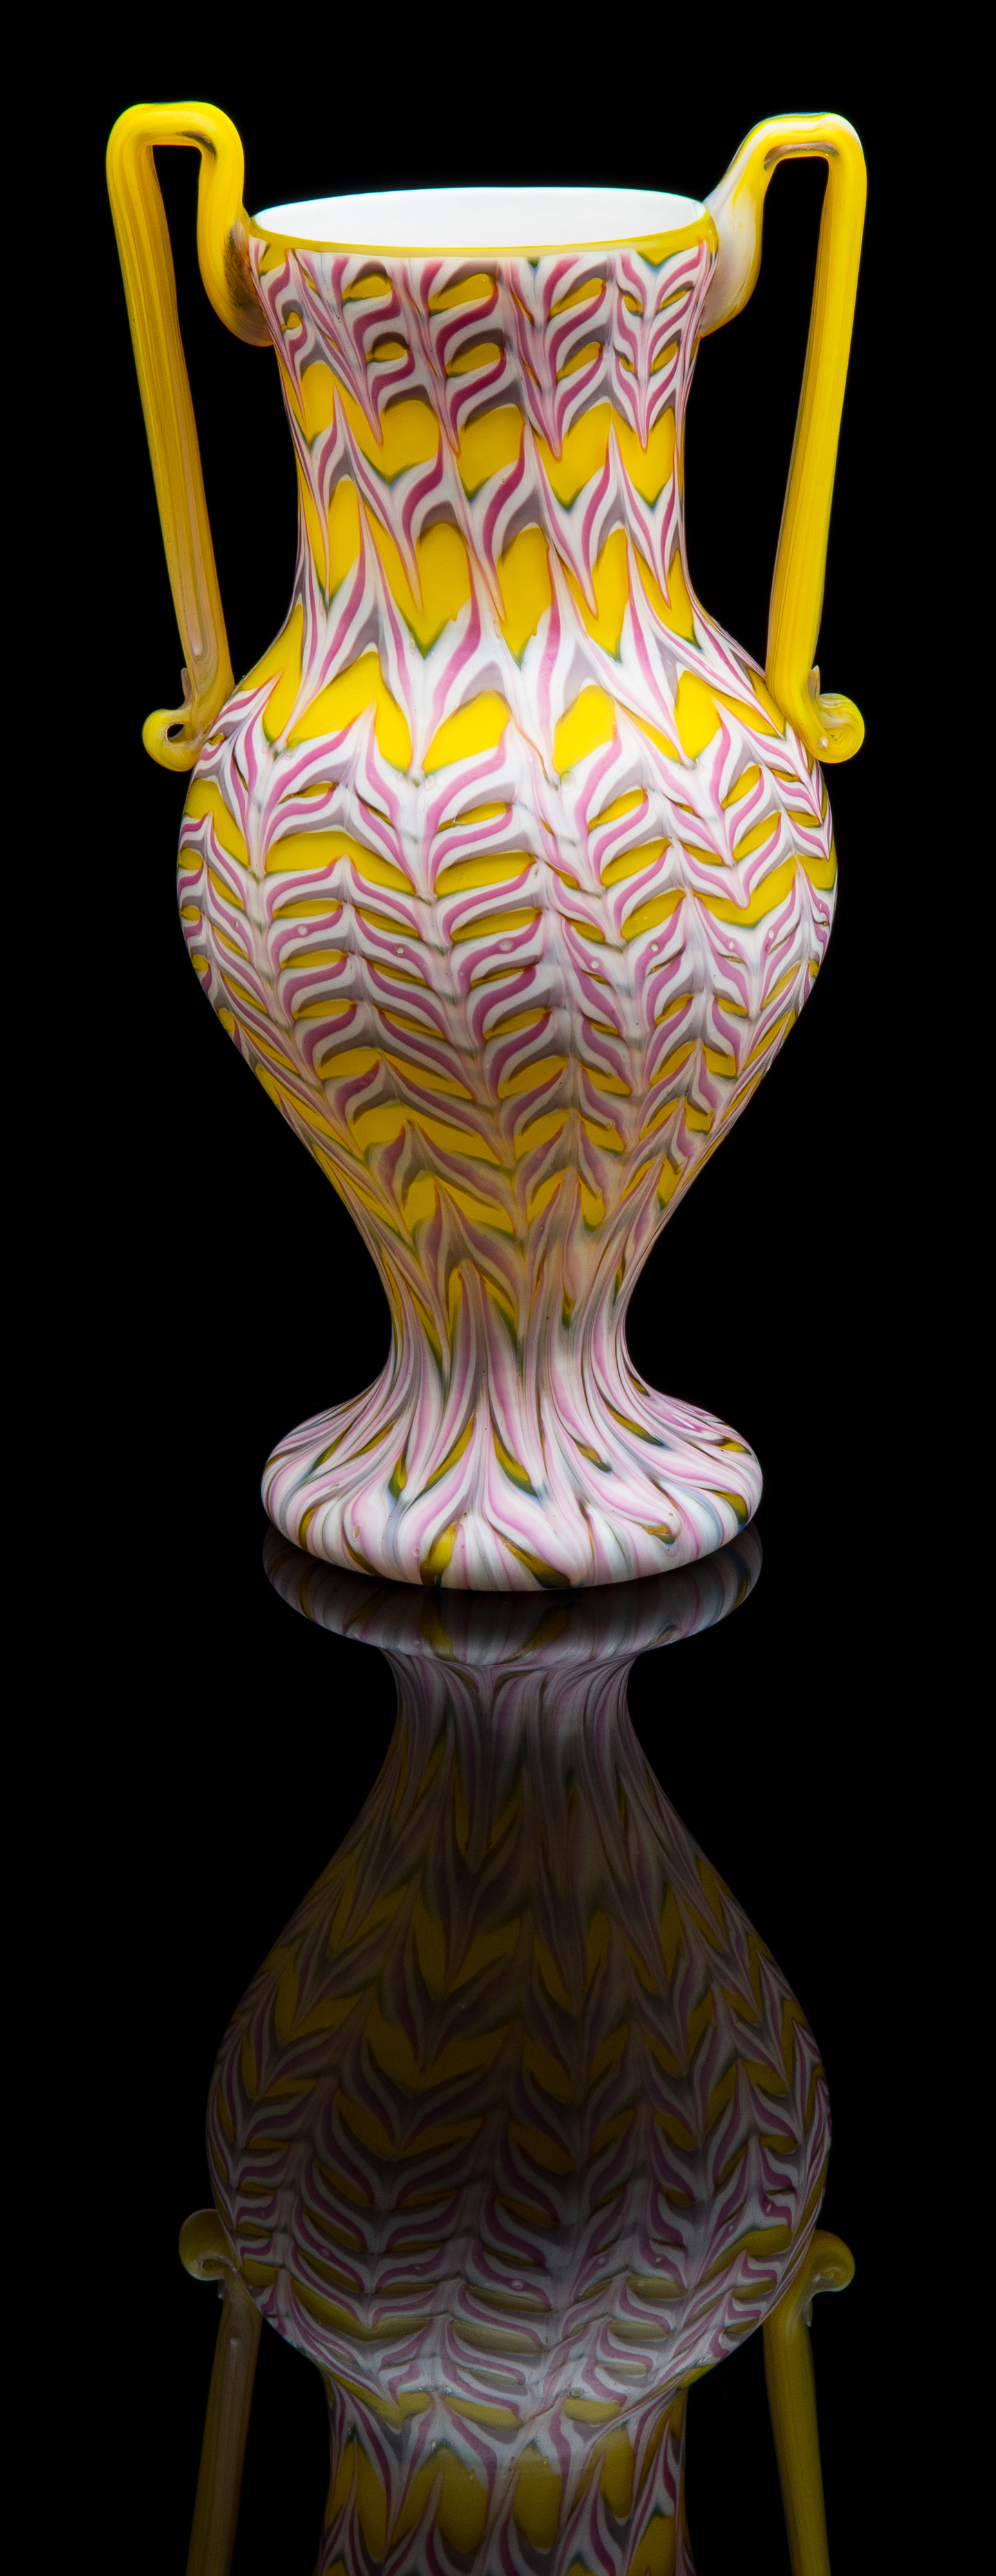  Fratelli Toso,  Yellow, Pink and White Fenicio Double Handled Vase  (1910, glass), VV.866 